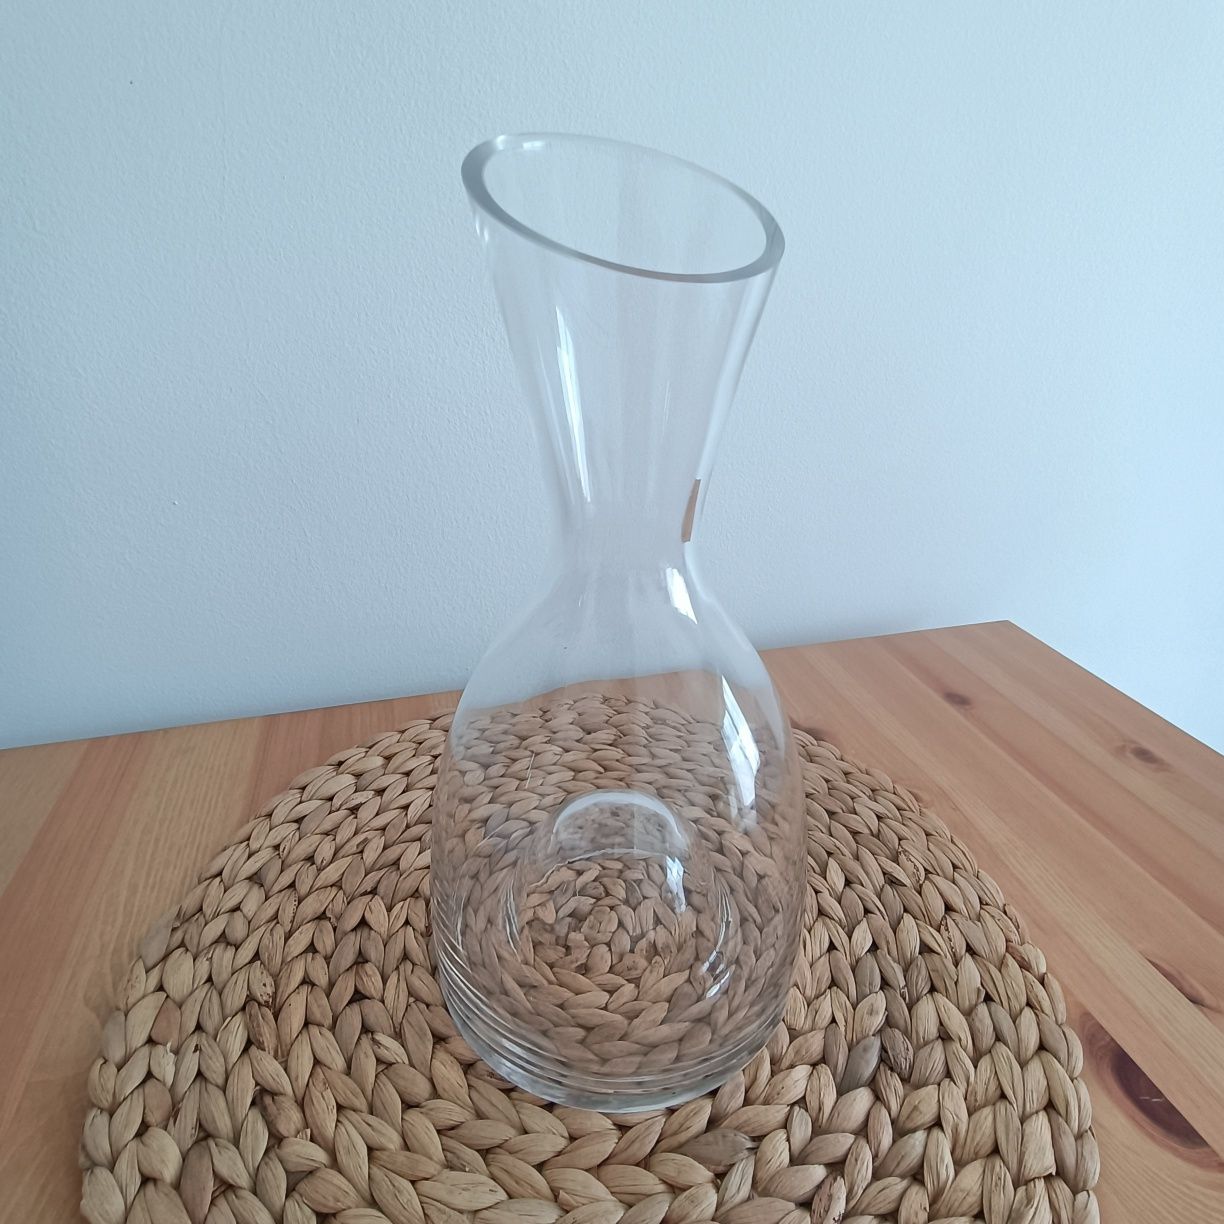 Decanter simples